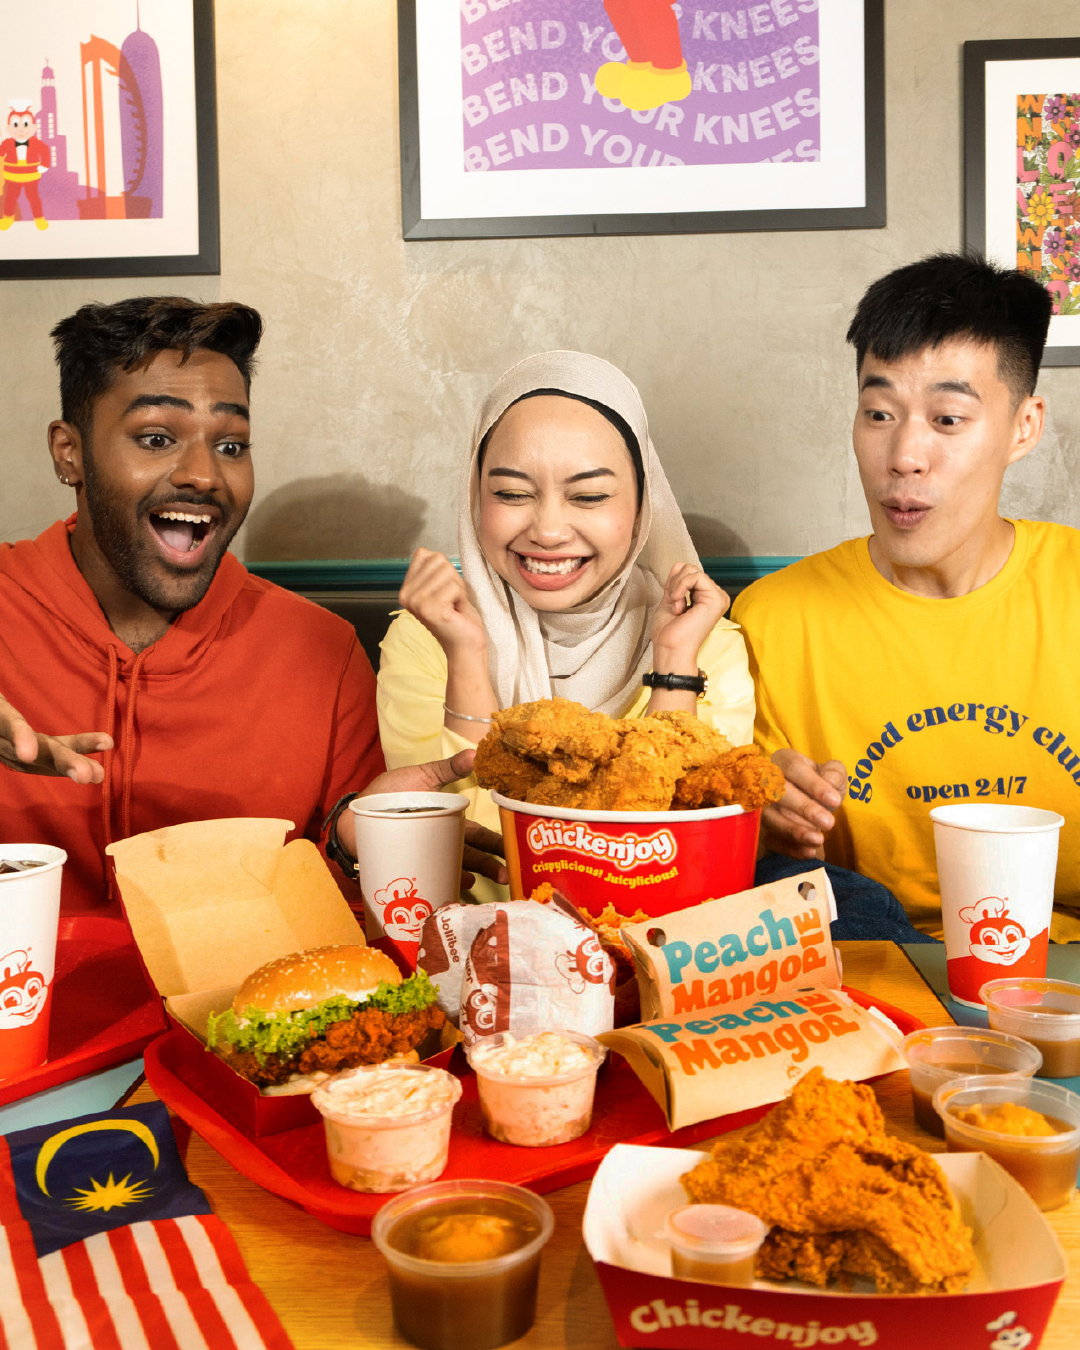 Brand Love Across Geographies and Generations. The support of loyal customers across generations and locations has solidified Jollibee’s position as a well-loved global restaurant brand.